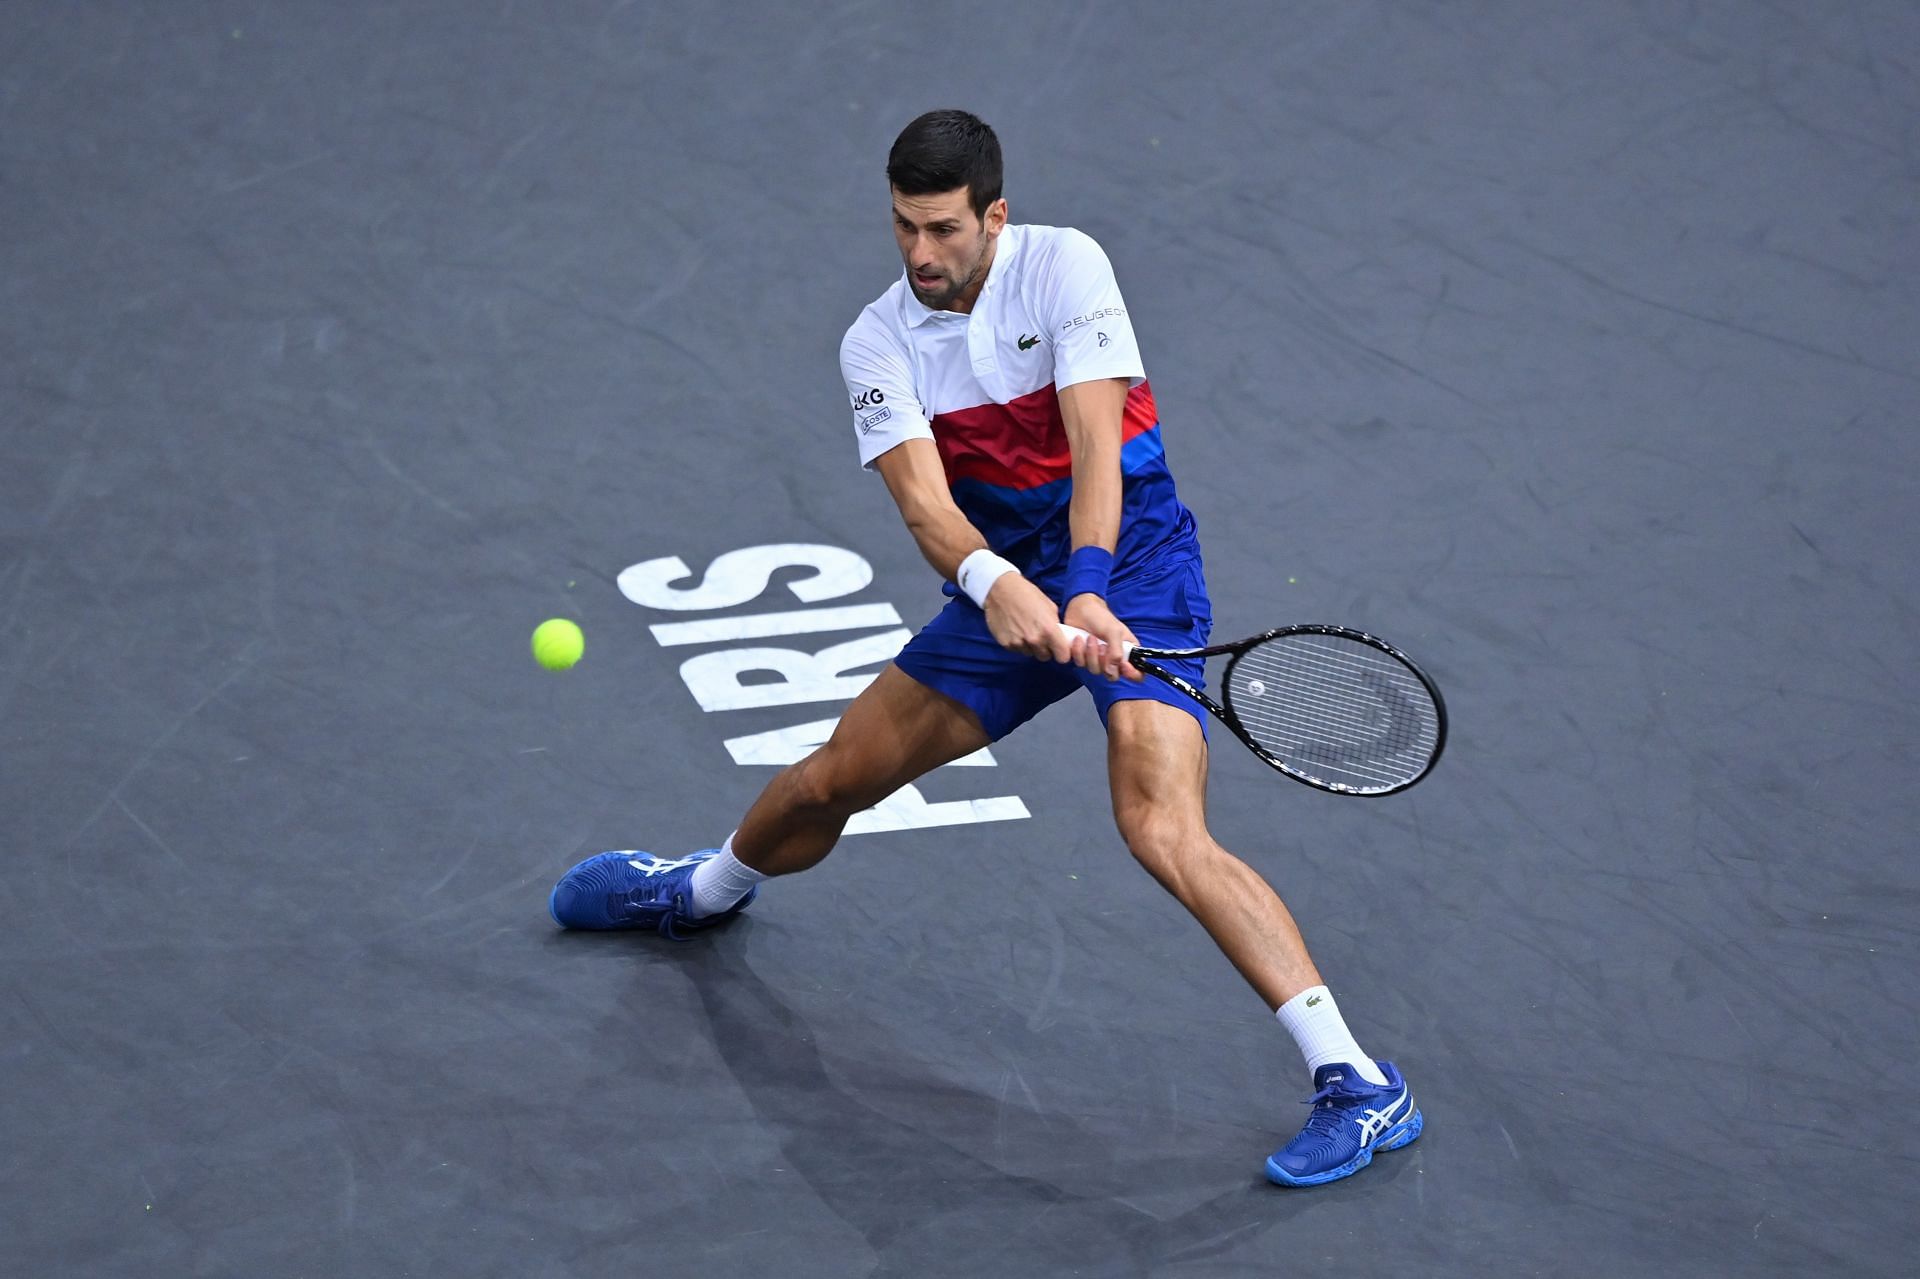 Novak Djokovic has posted two wins in two matches on his return to action